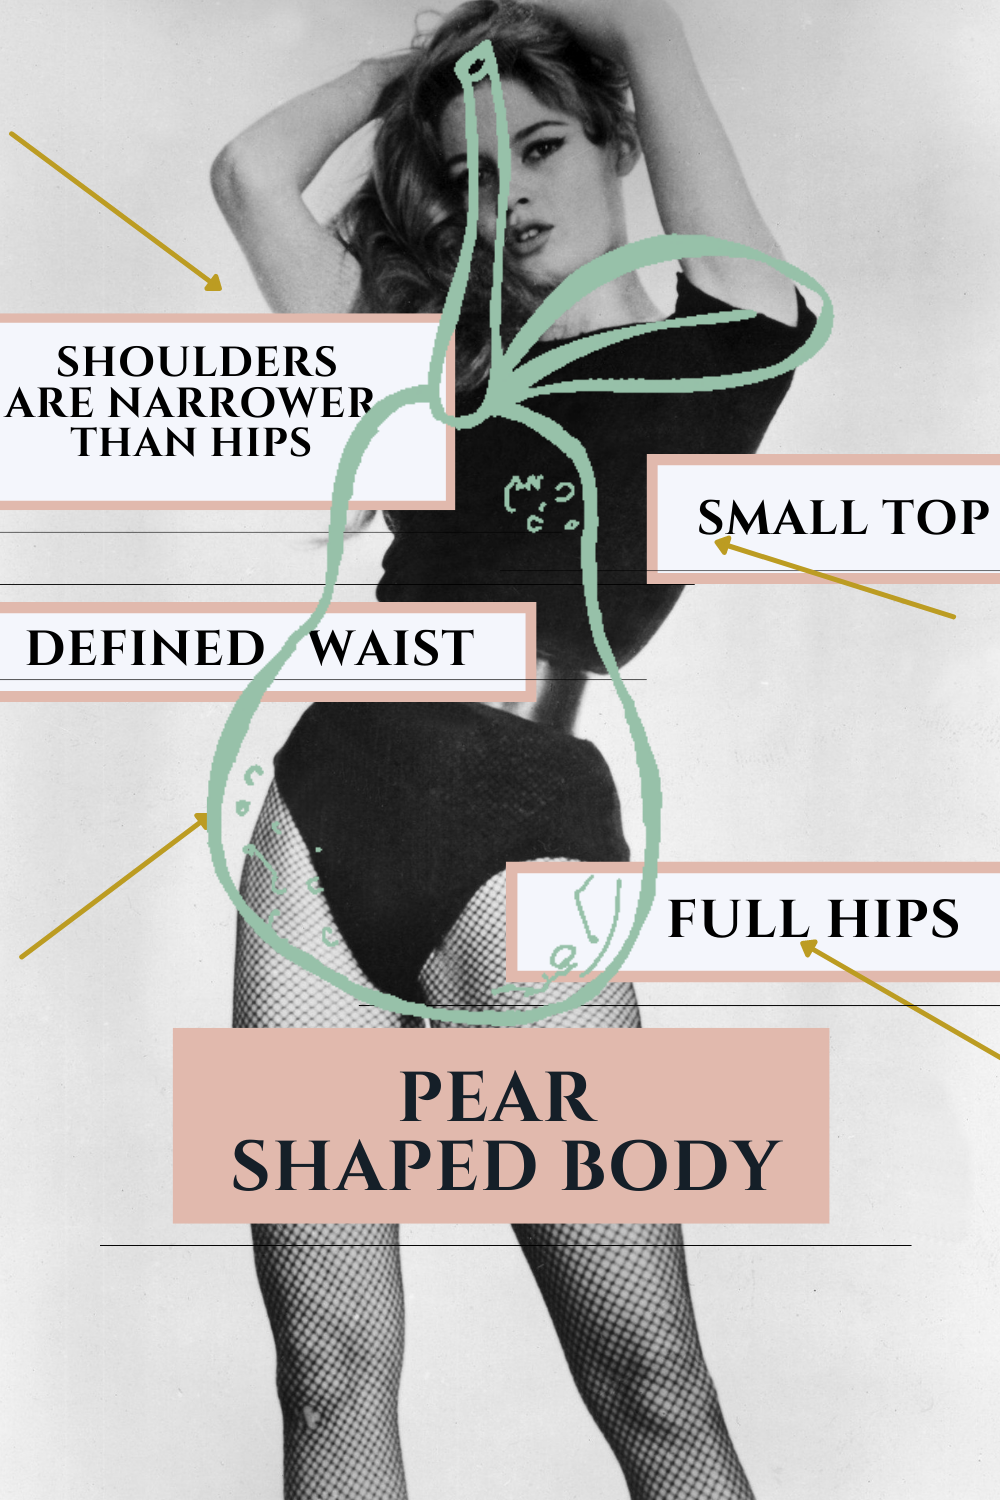 Stop Cursing Your Hips: Style Tips for Pear Shaped Women